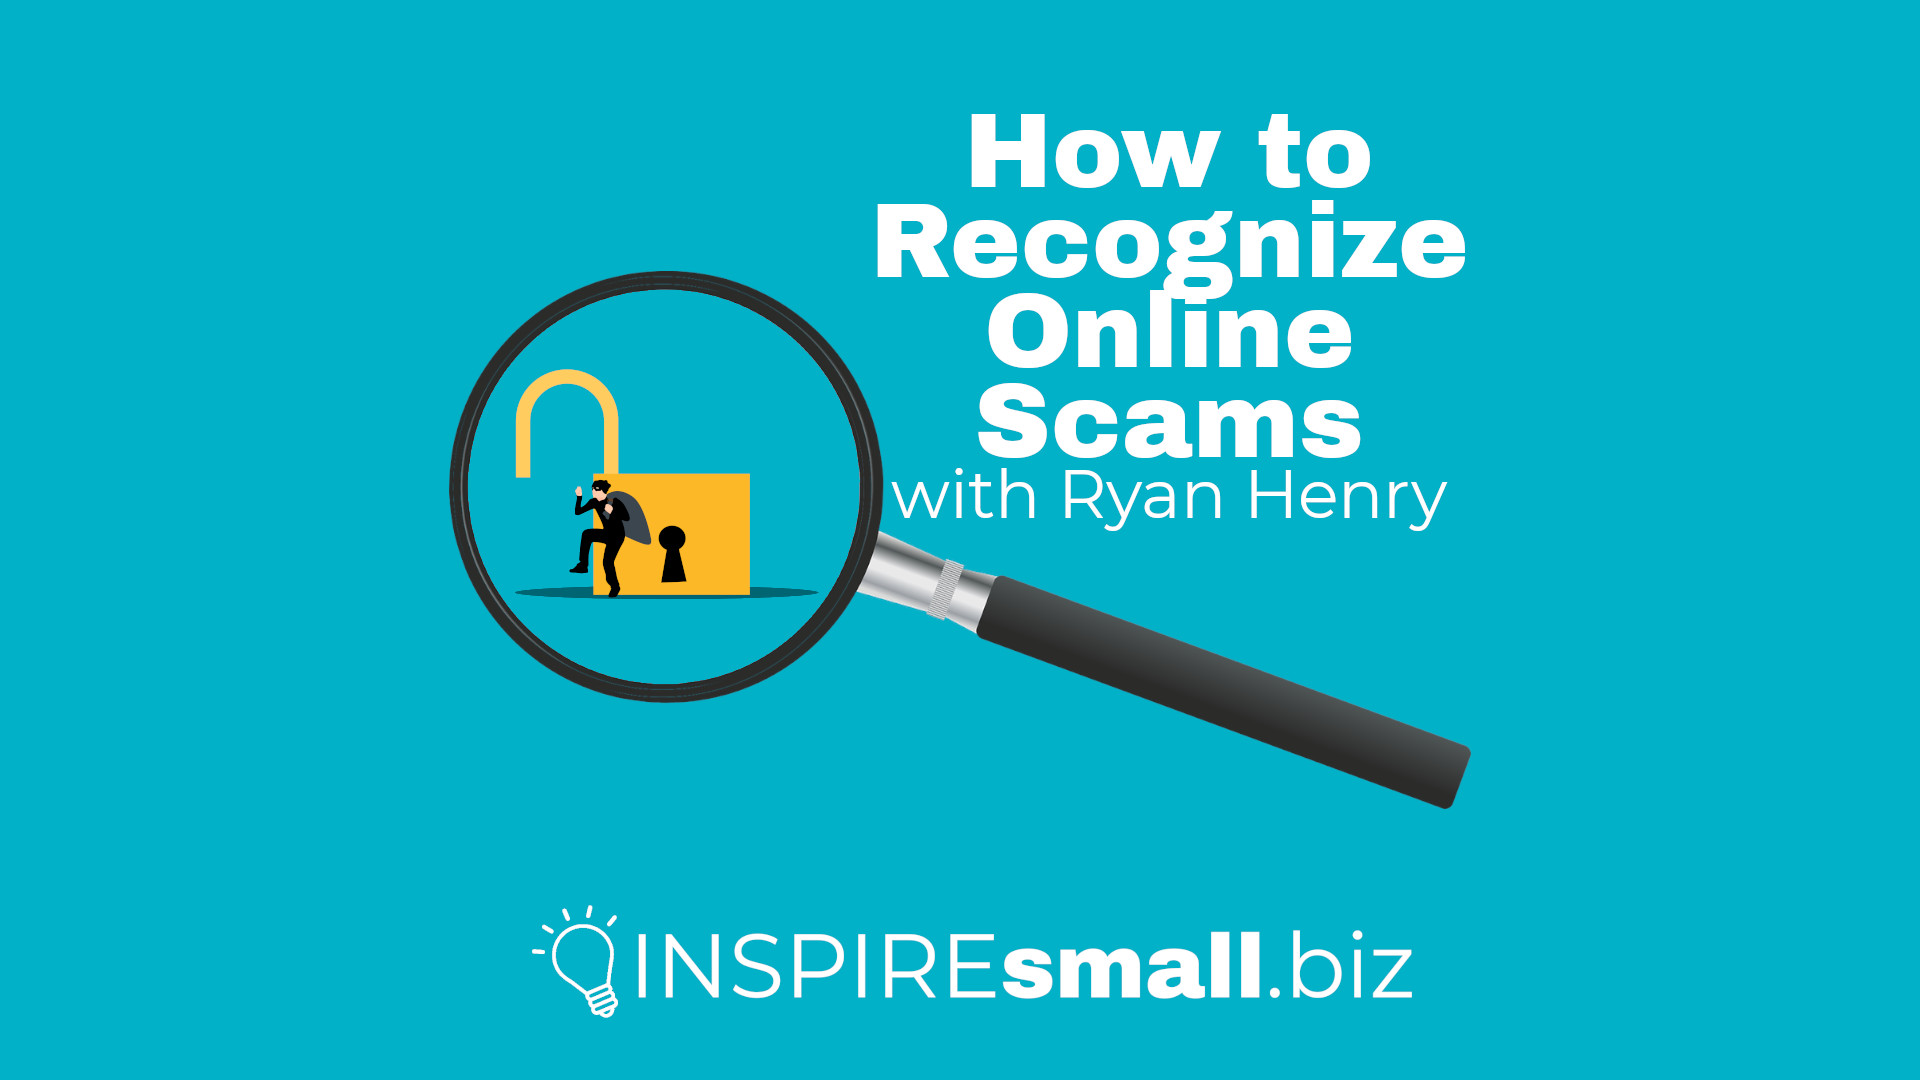 How to Recognize Online Scams with Ryan Henry, Idea Guy for INSPIREsmall.biz